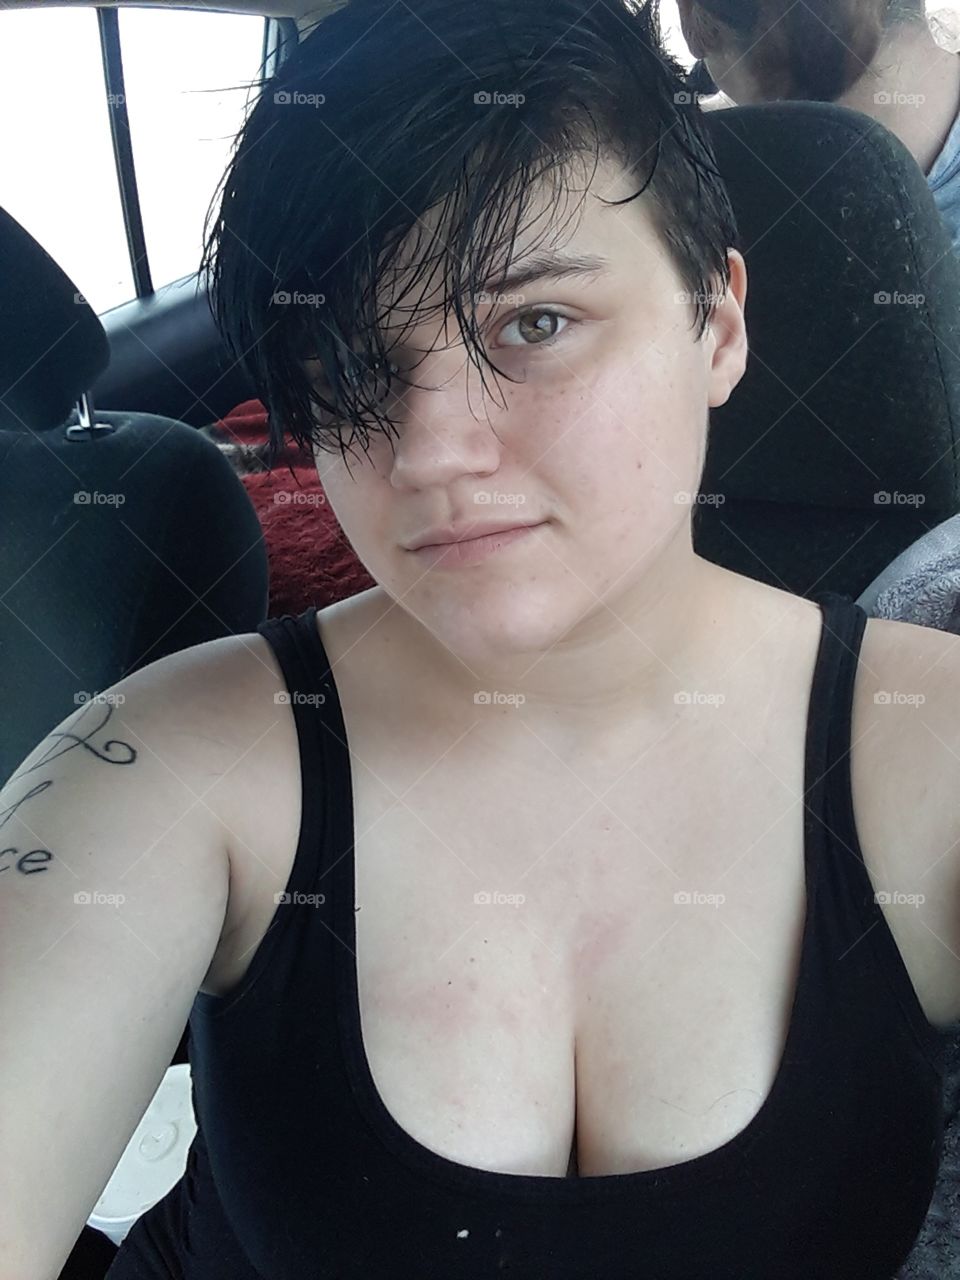 this is a picture of the other side of my face on the same day at the beach. I think I look very nice in this photo as well.